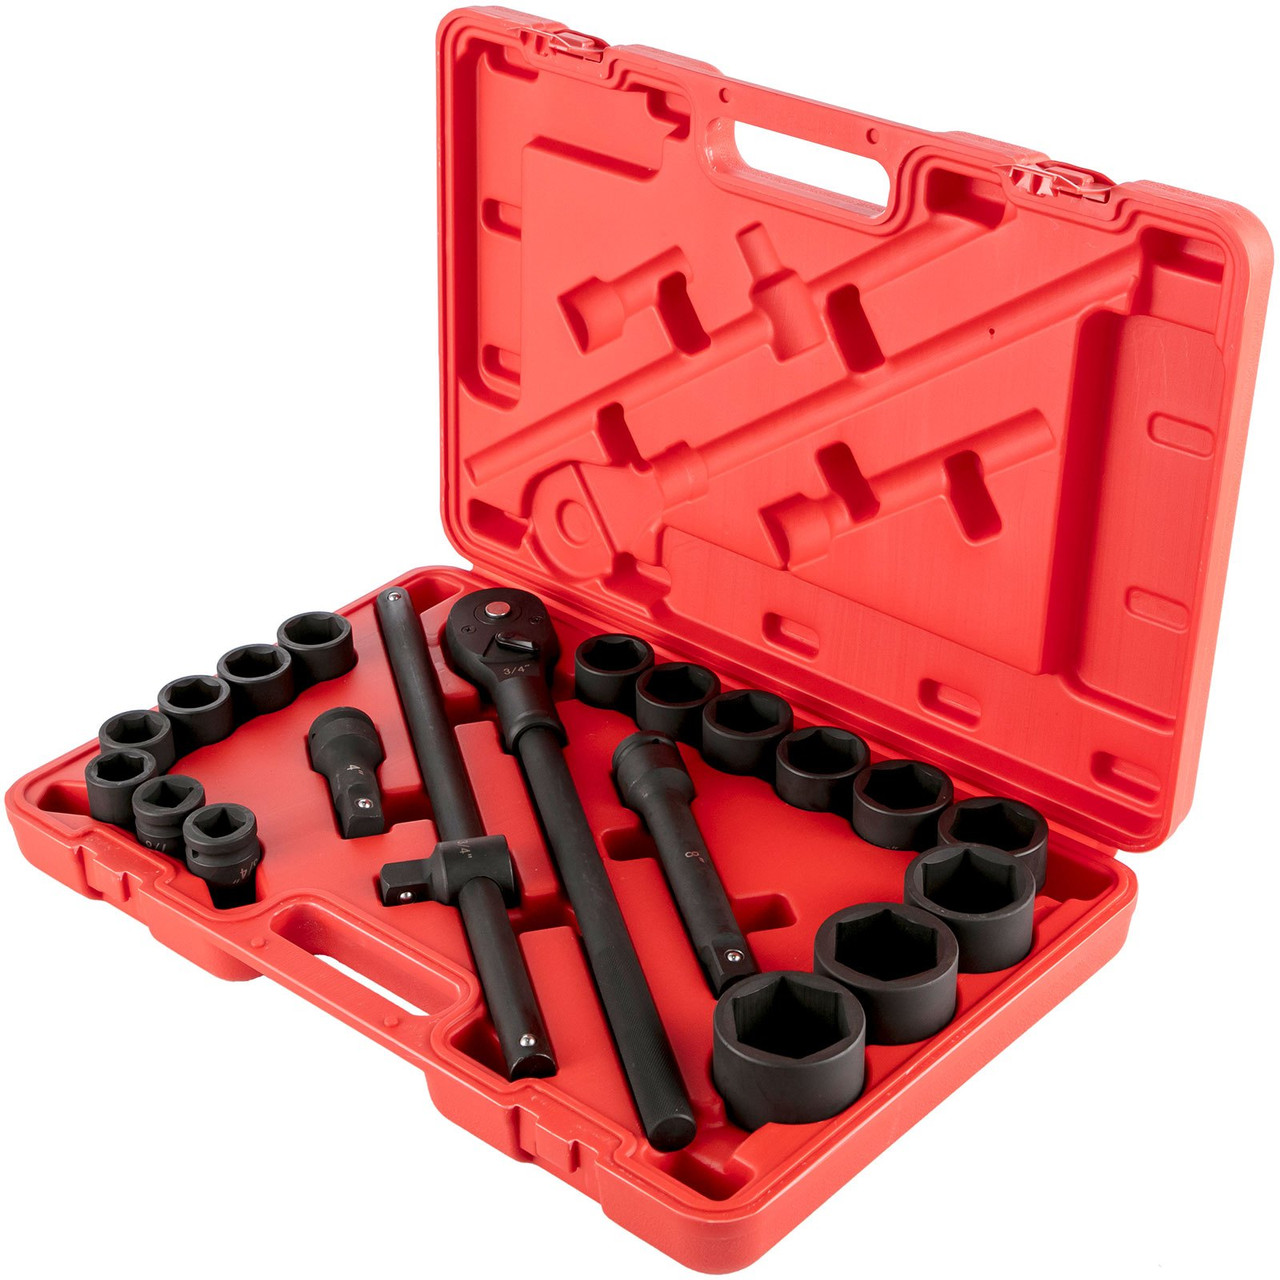 Impact Socket Set 3/4 Inches 21 Piece Standard Impact Sockets, Socket Assortment 3/4 Inches Drive Socket Set Impact Standard SAE Sizes 3/4 Inches to 2 Inches Includes Adapters and Ratchet Handle